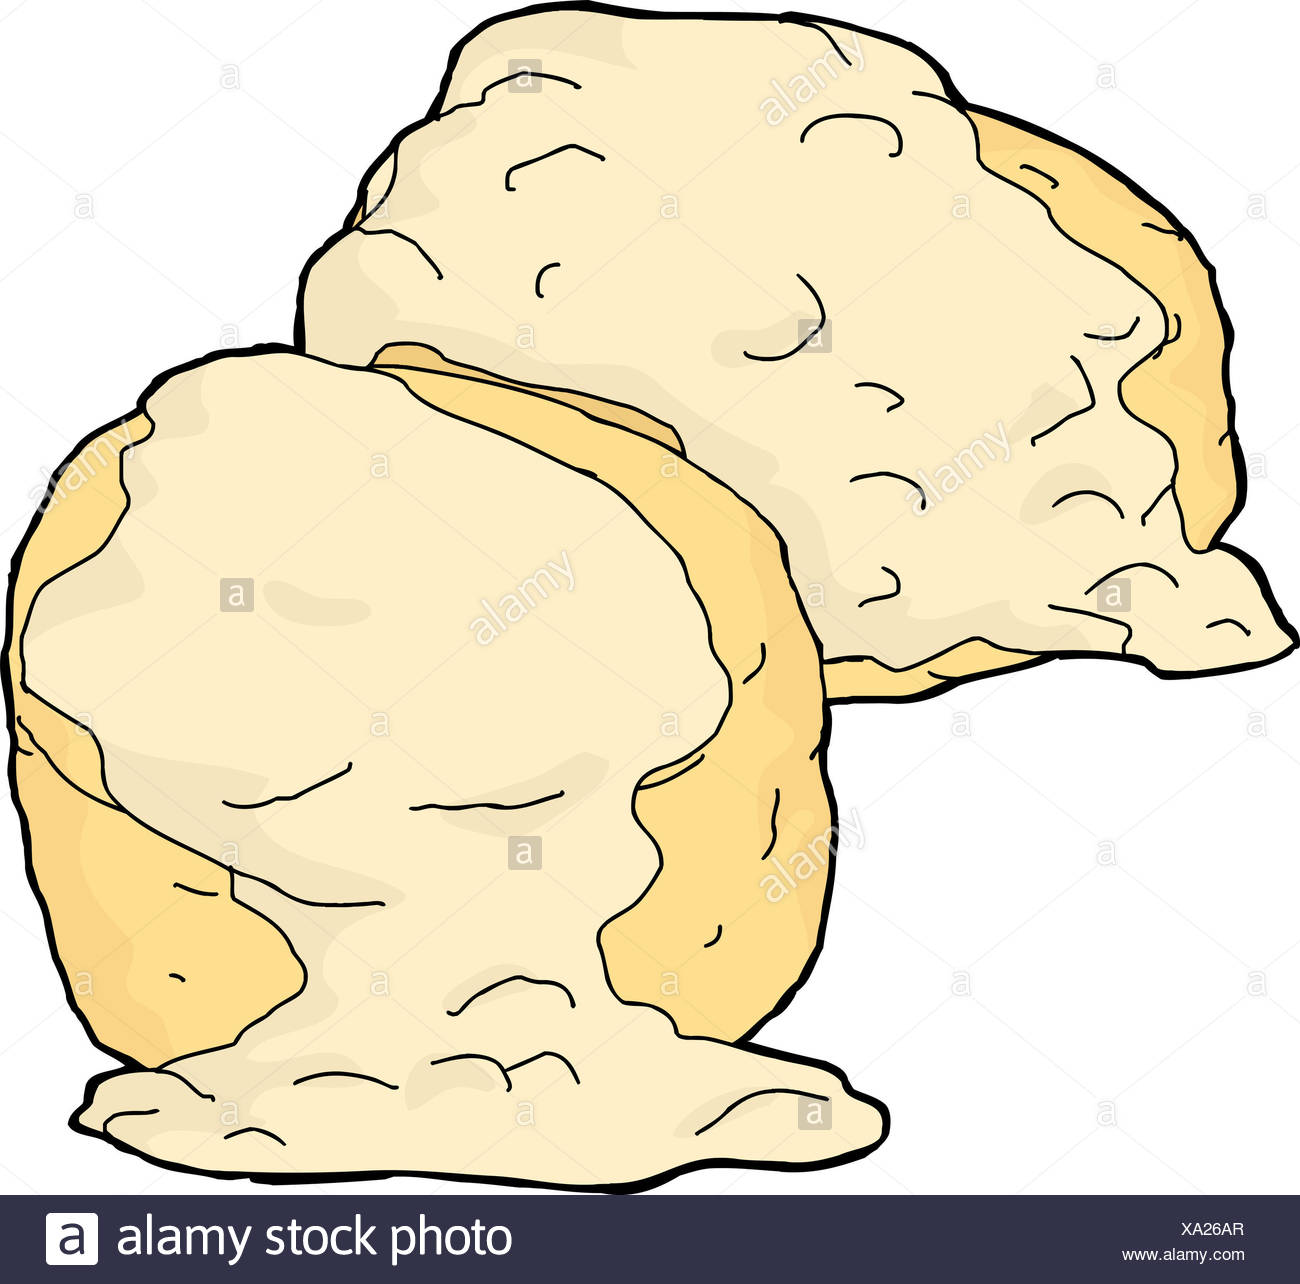 Two biscuits and gravy on white background Stock Photo: 281561359.